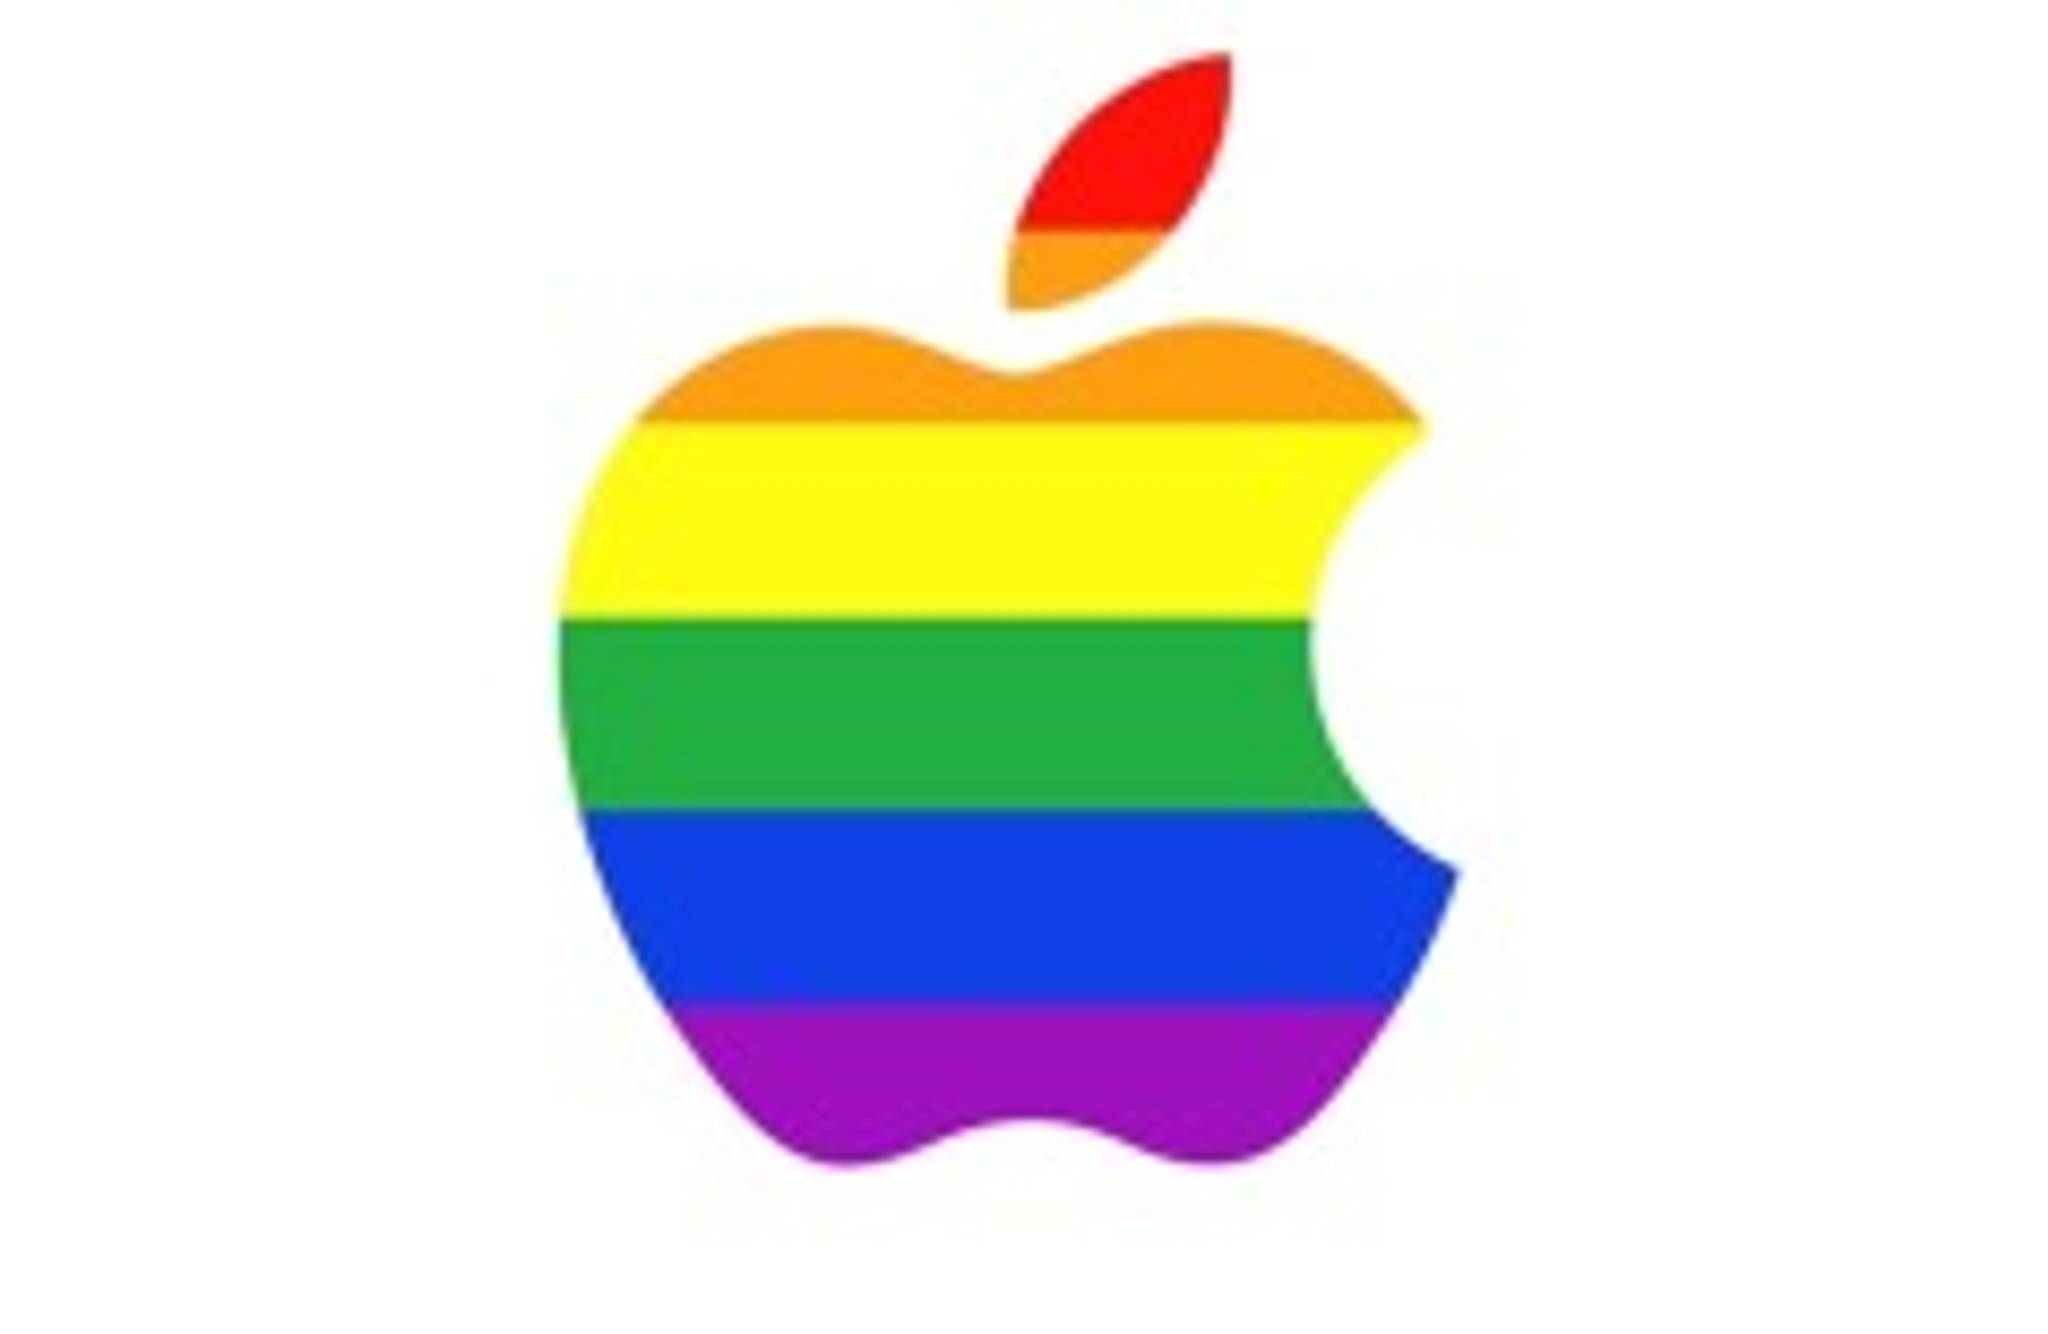 Brands in support of gay marriage